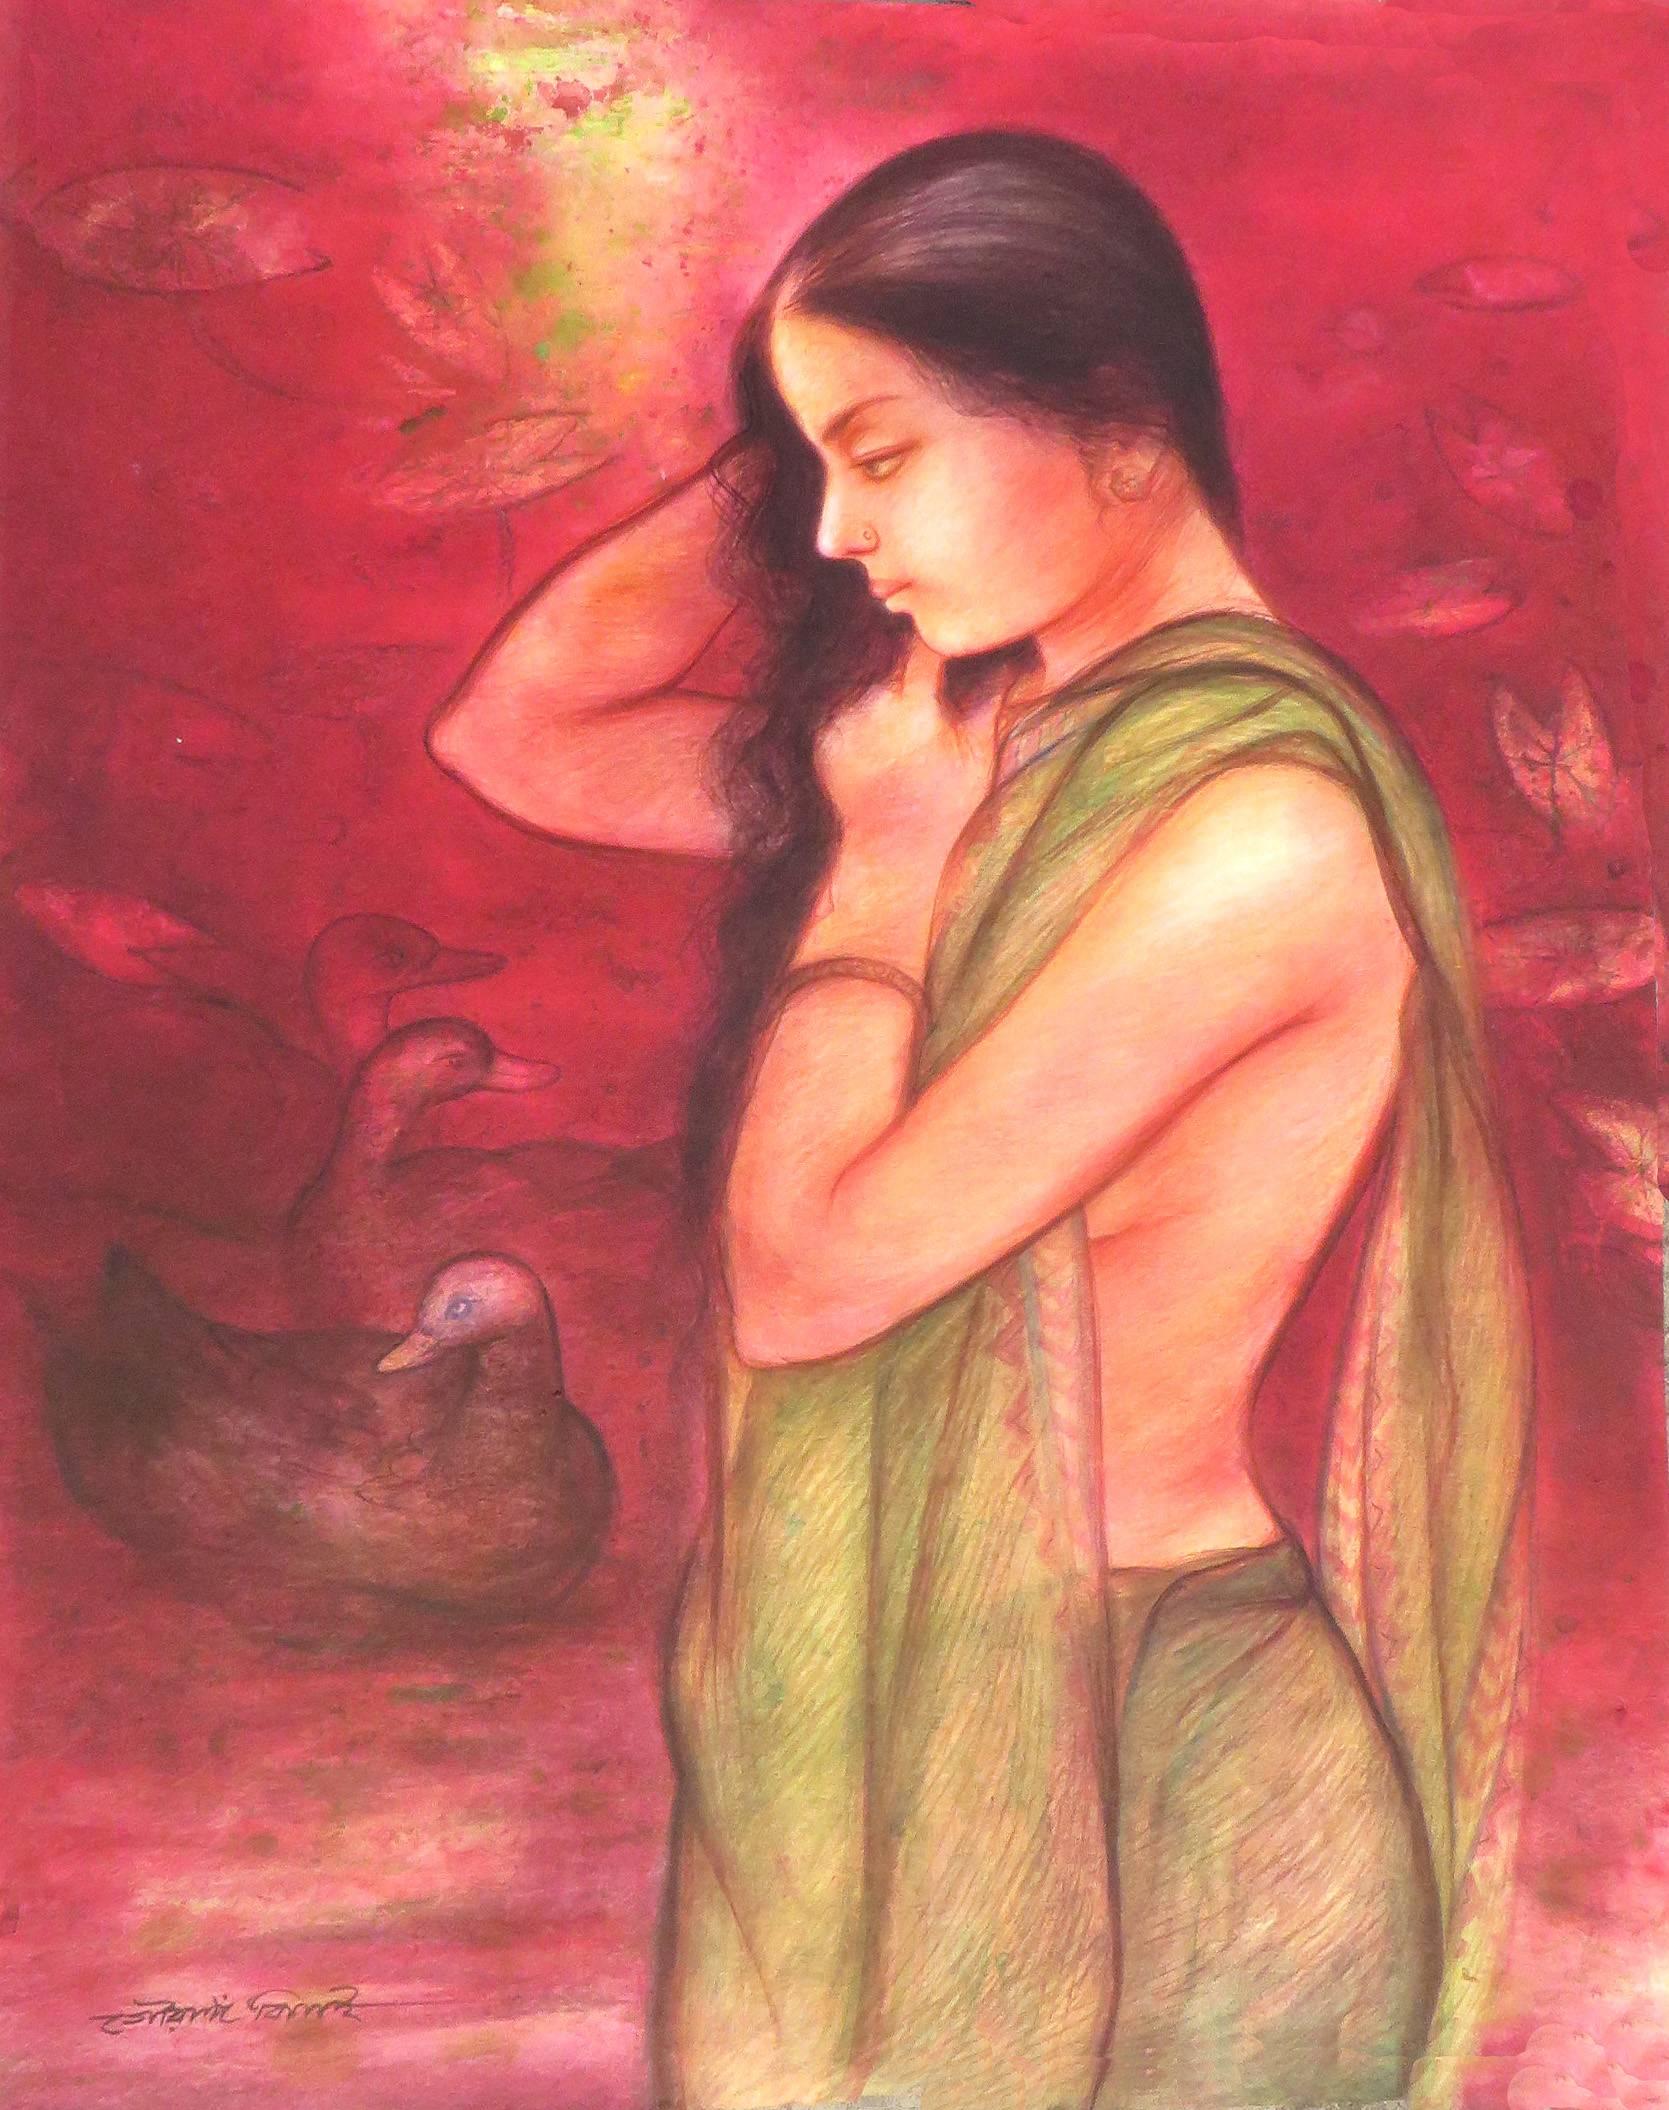 Lotus Pond, Bathing Bengali Women, Mixed Media, Watercolor, Red, Green"In Stock"